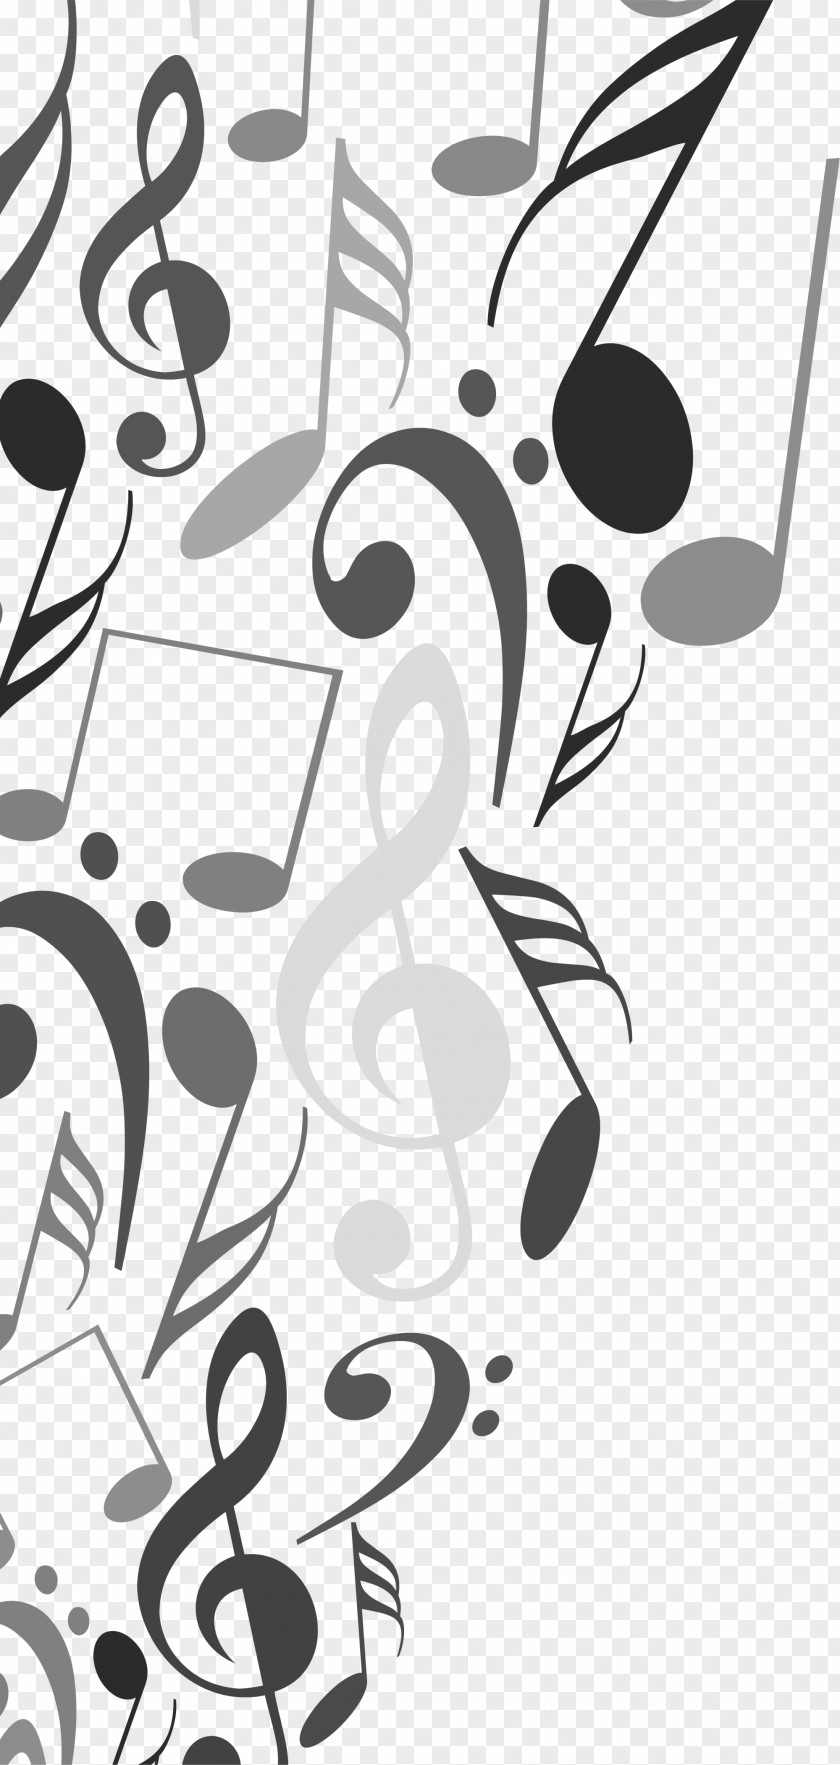 Background Music Illustration PNG music Illustration, Black notes background, G-clef and note print illustration clipart PNG